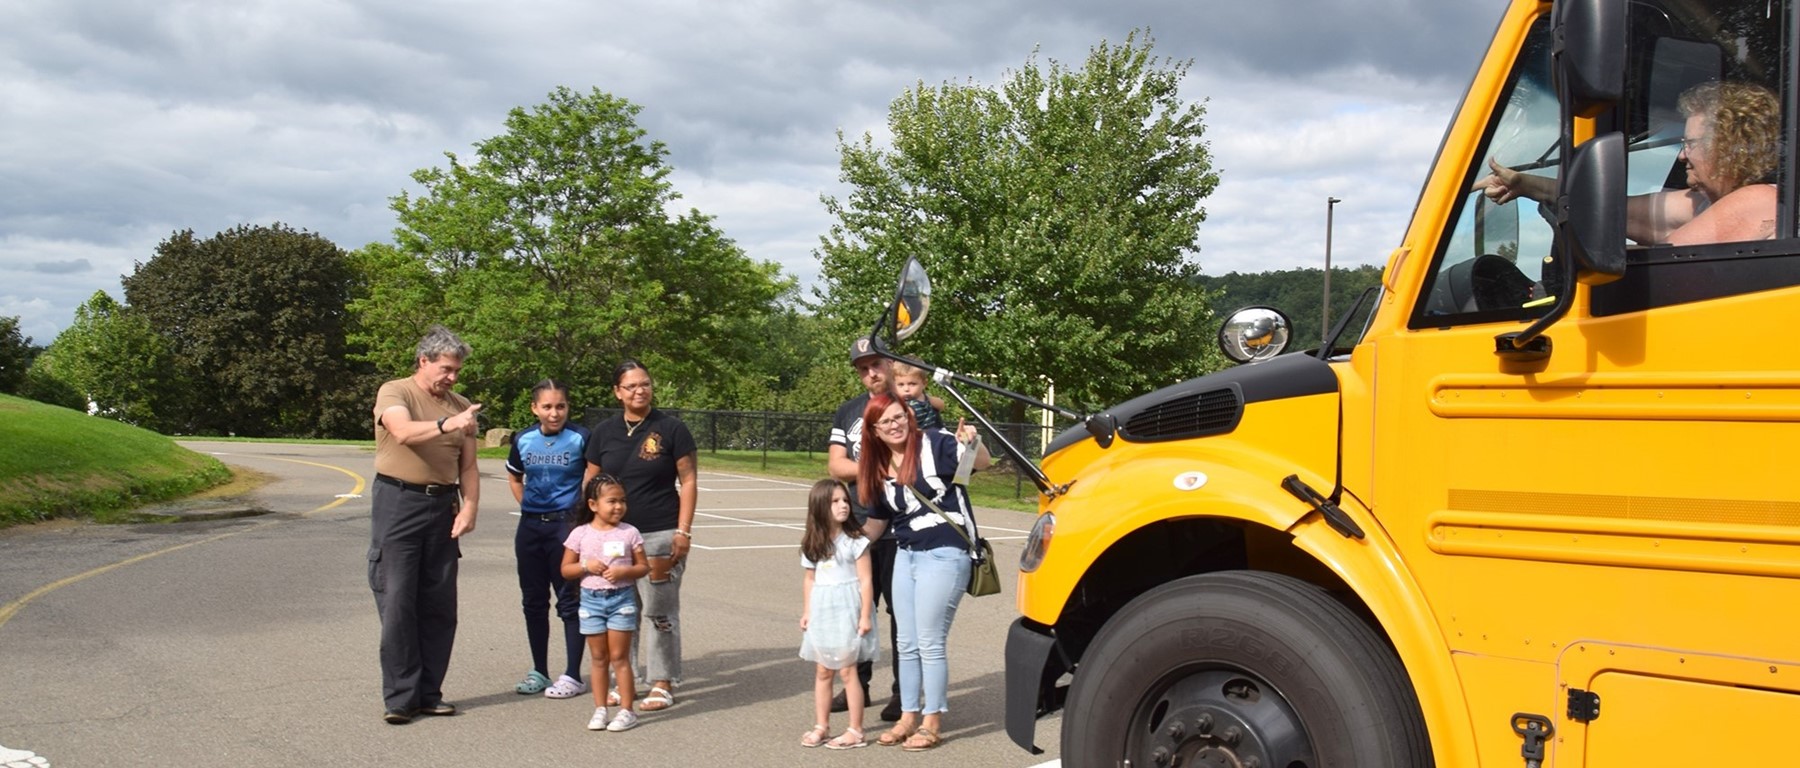 Glenwood kindergarten students and their families learn how to cross safely in front of a school bus during orientation.